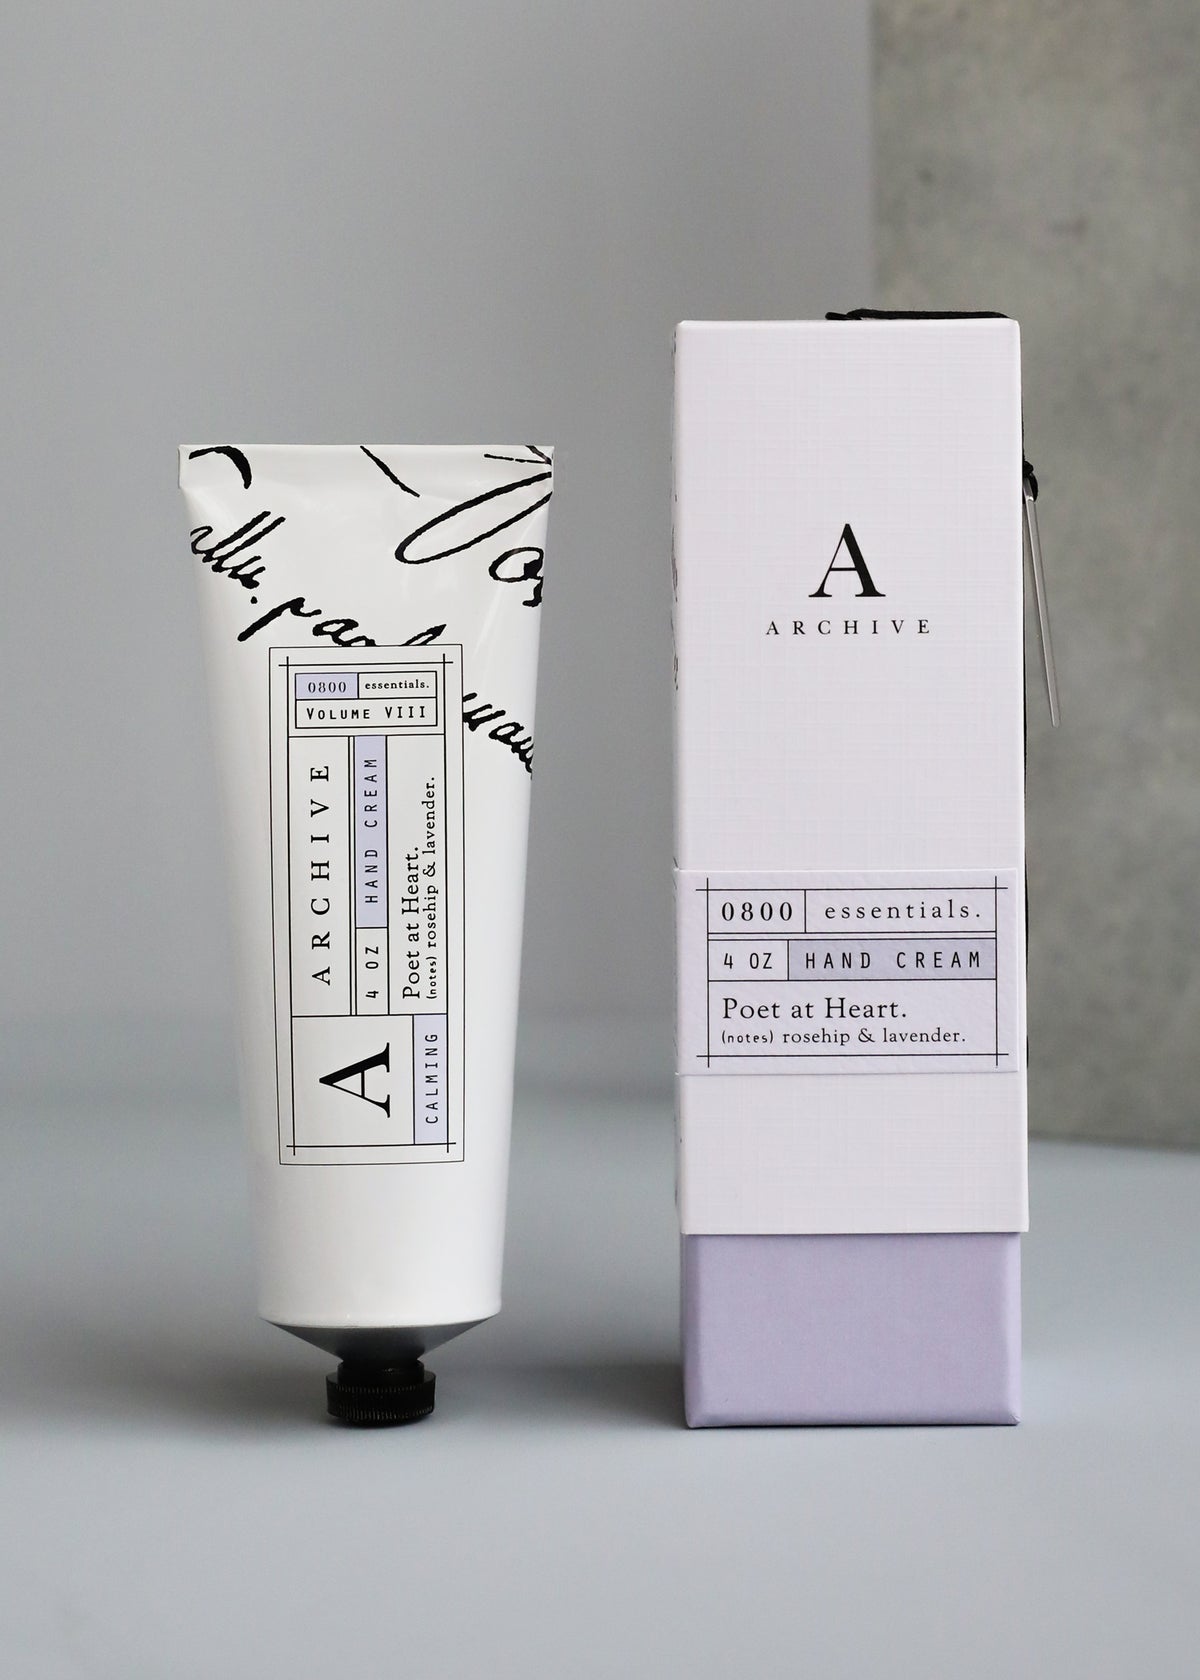 A tube of ARCHIVE by Margot Elena - Poet at Heart Hand Cream next to its box, set against a gray backdrop.